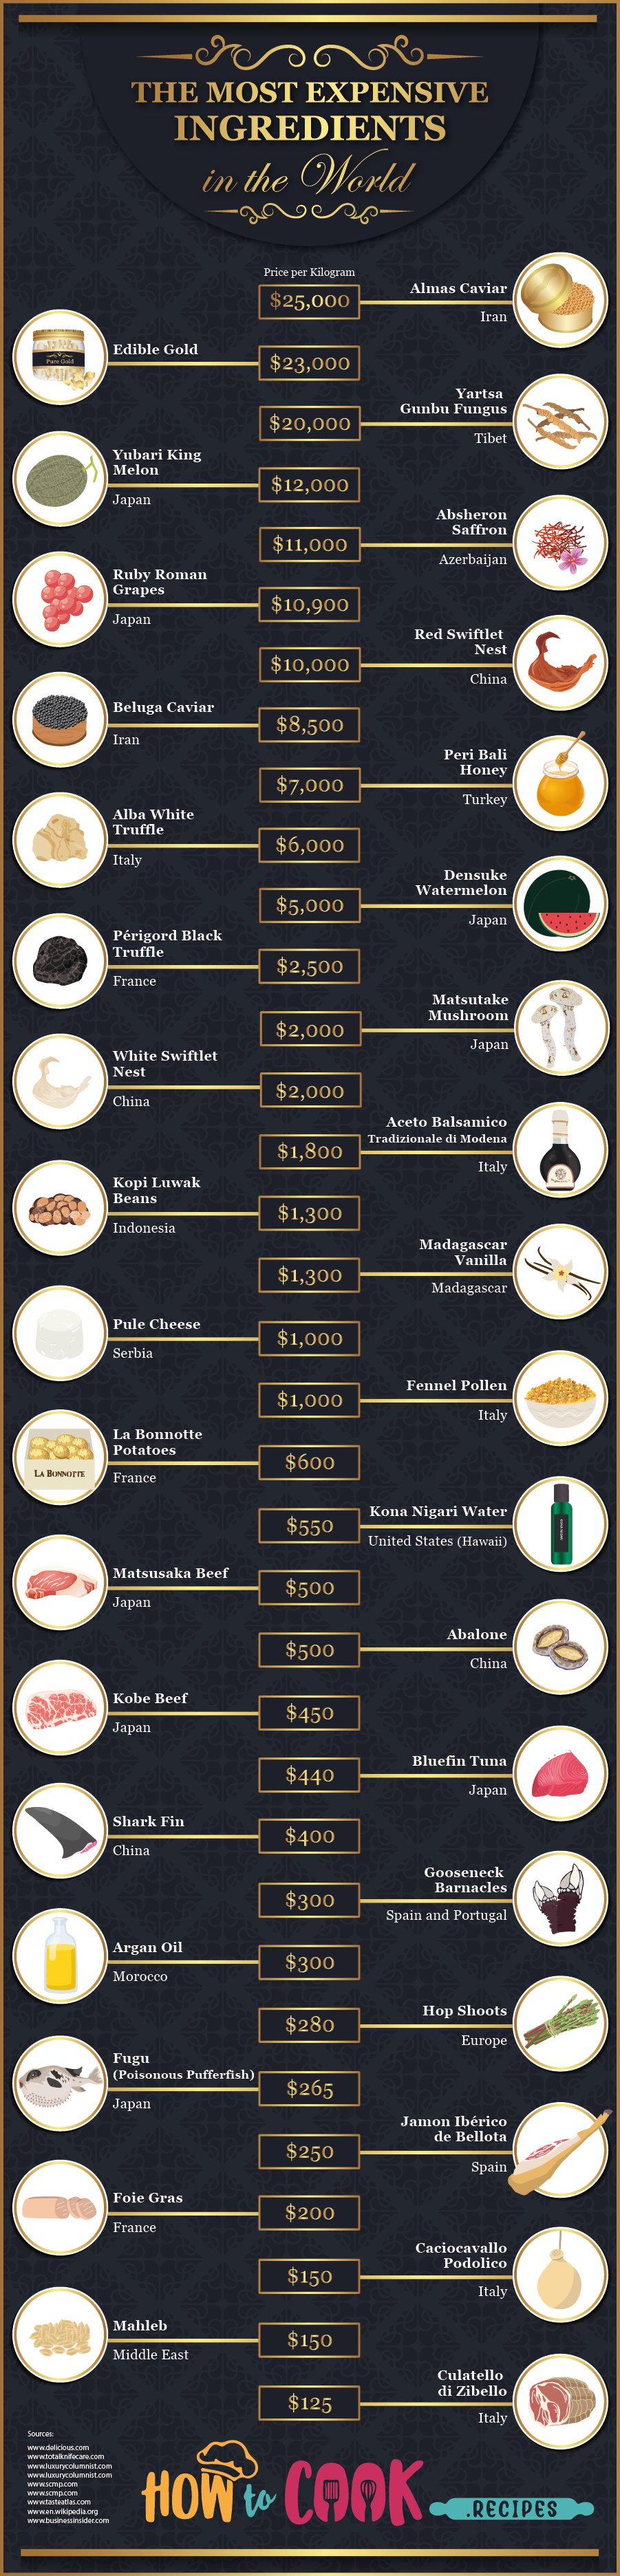 The Most Expensive Ingredients in the World